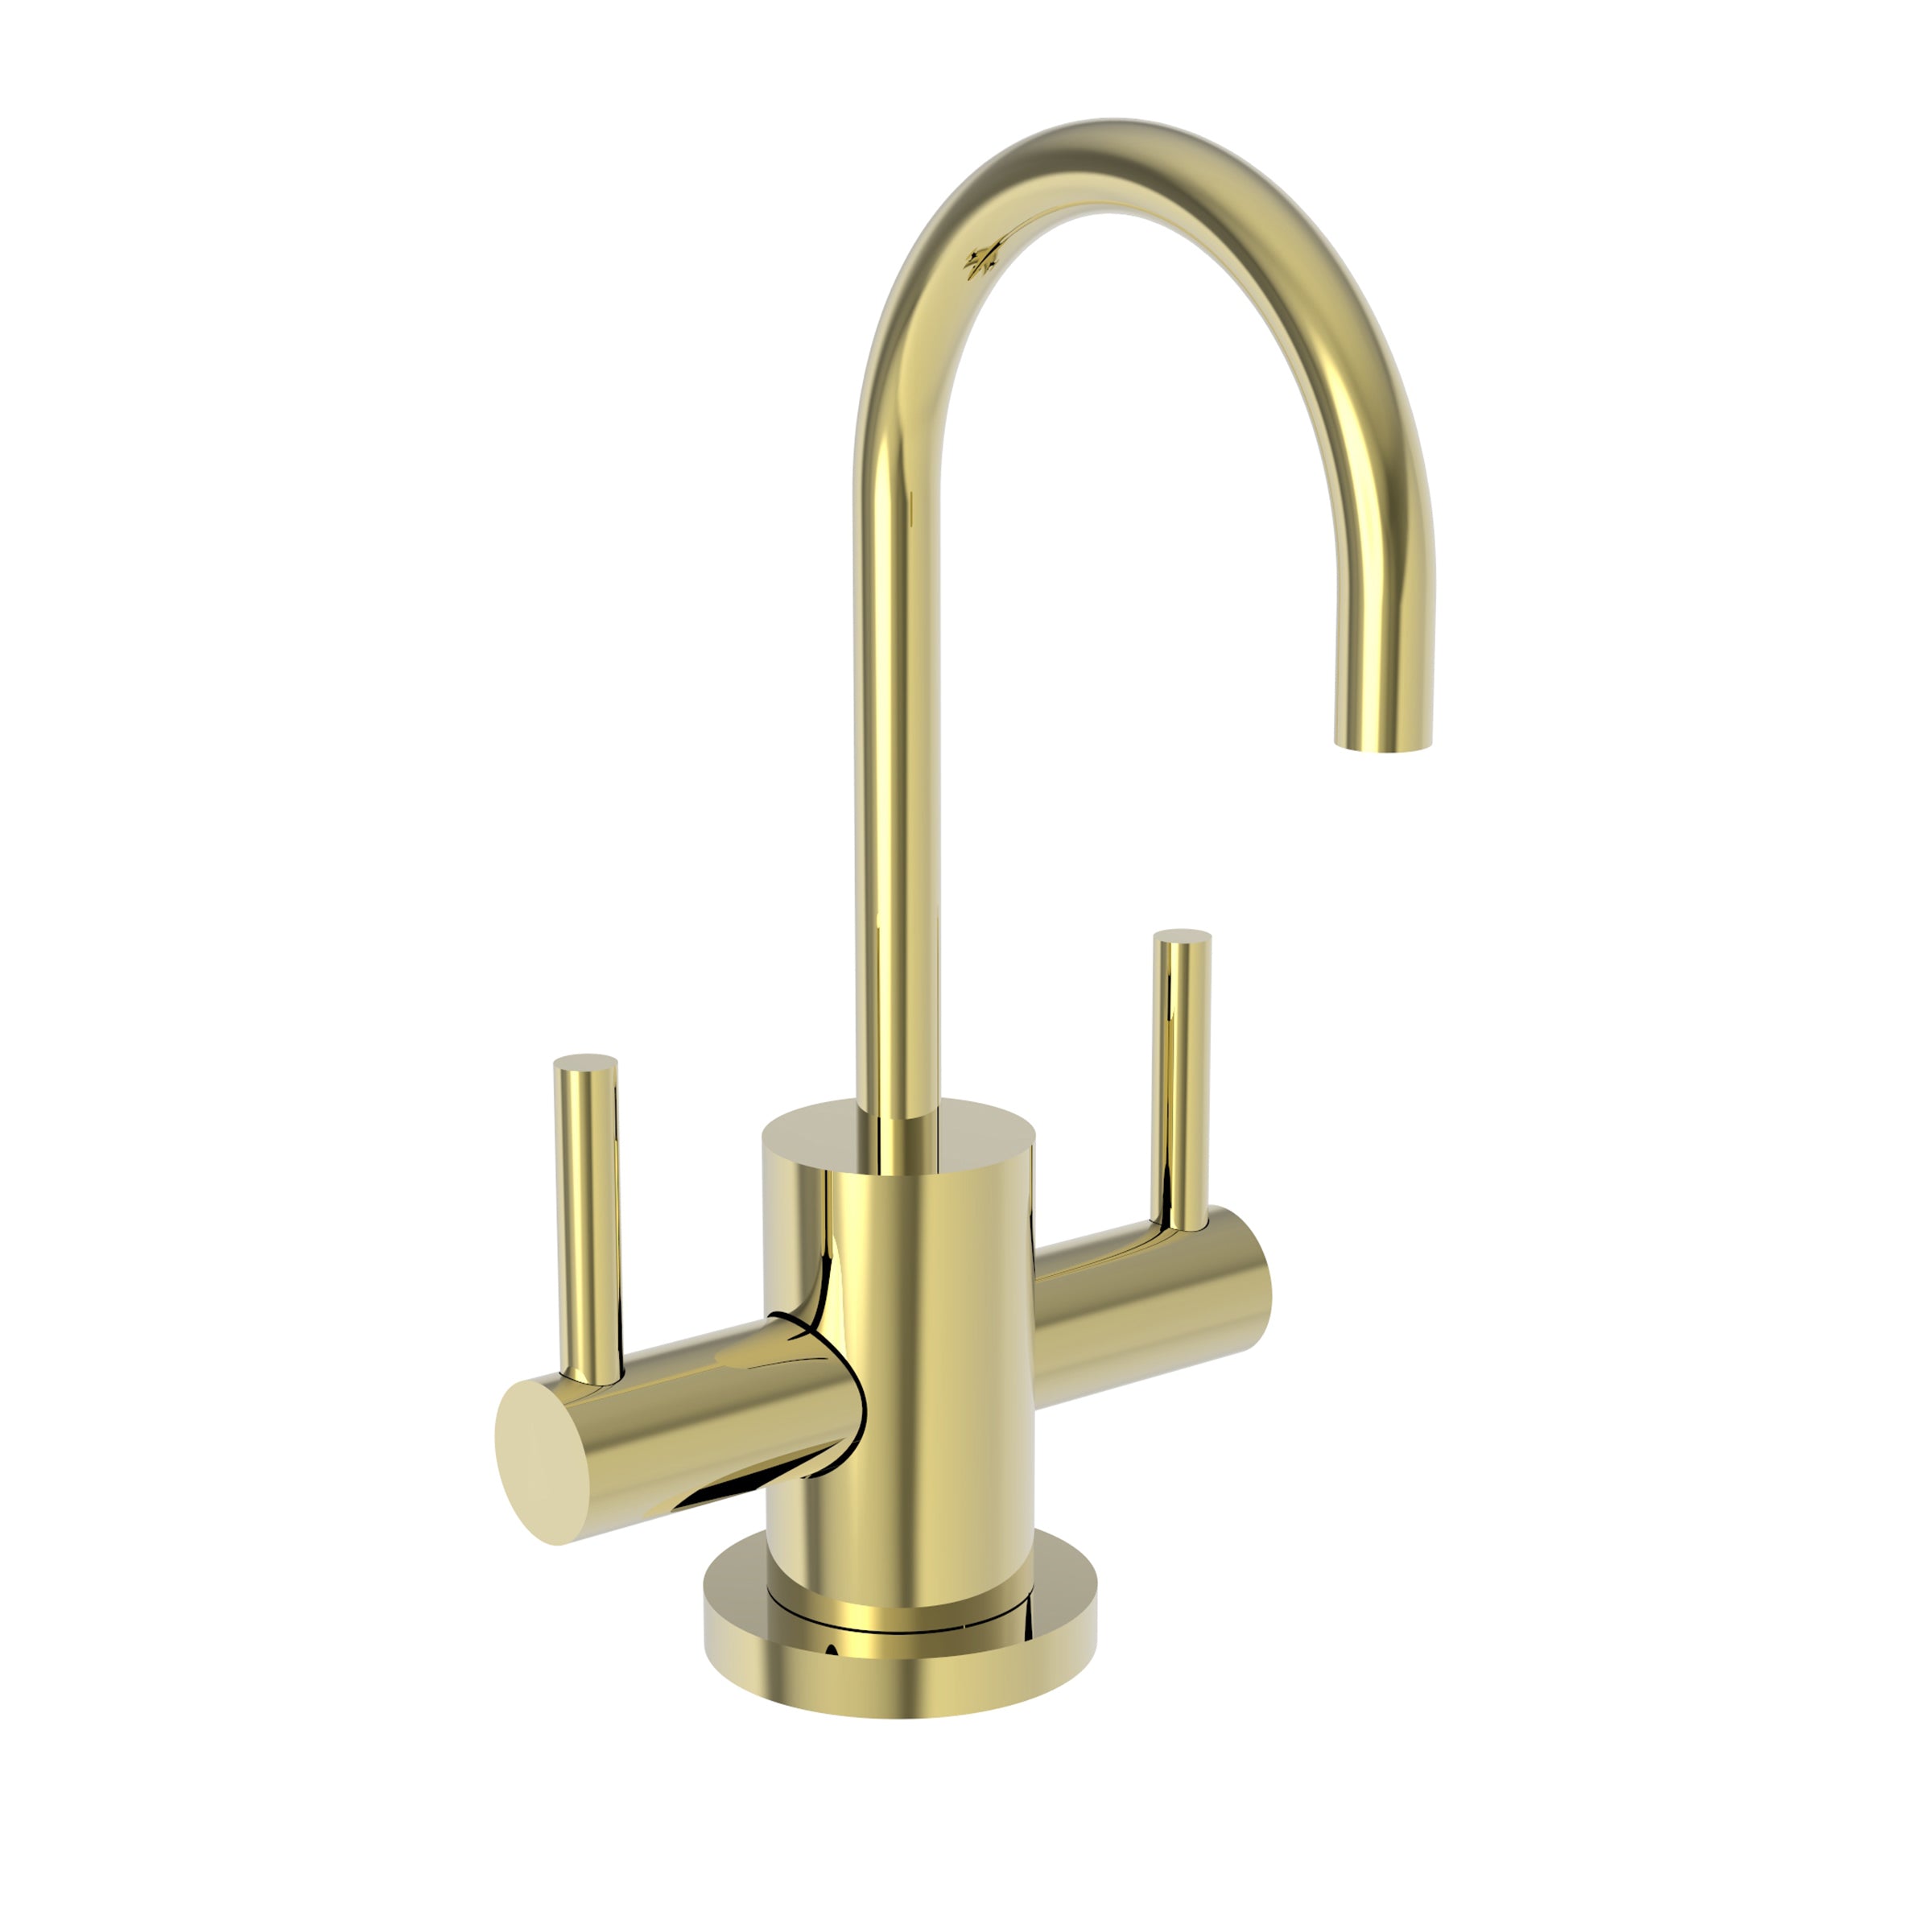 Newport Brass 890-1660/15S at Lux Kitchen and Bath Gallery Your